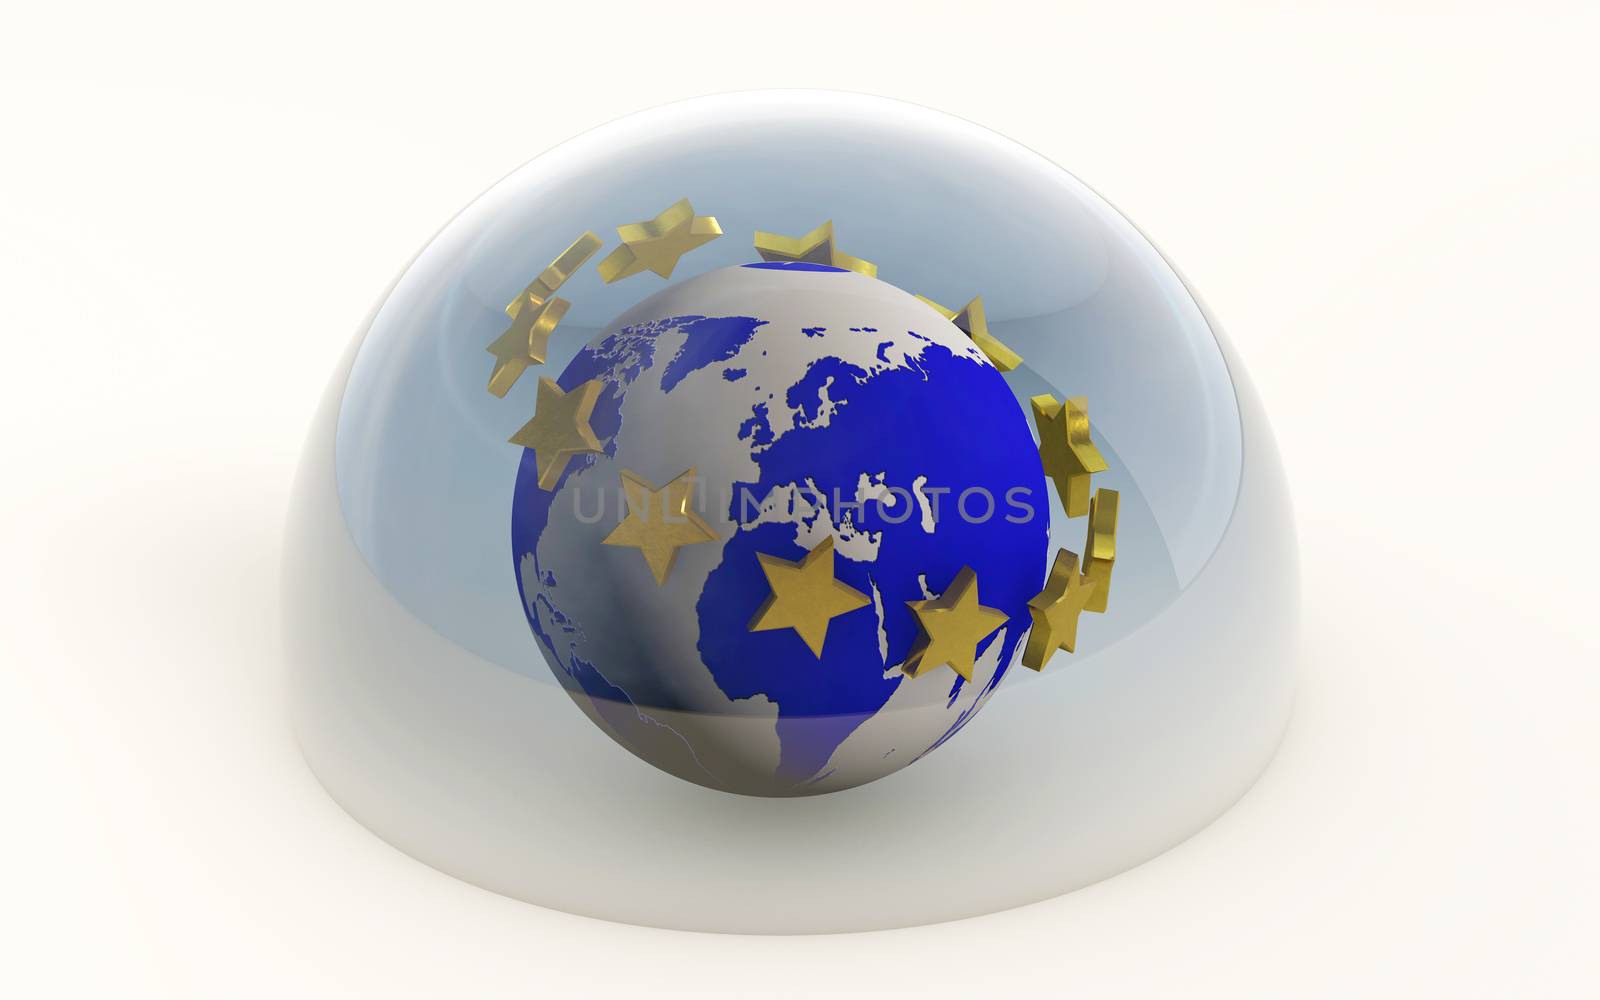 3d rendering of the european union with gold stars protected by F1b0nacci